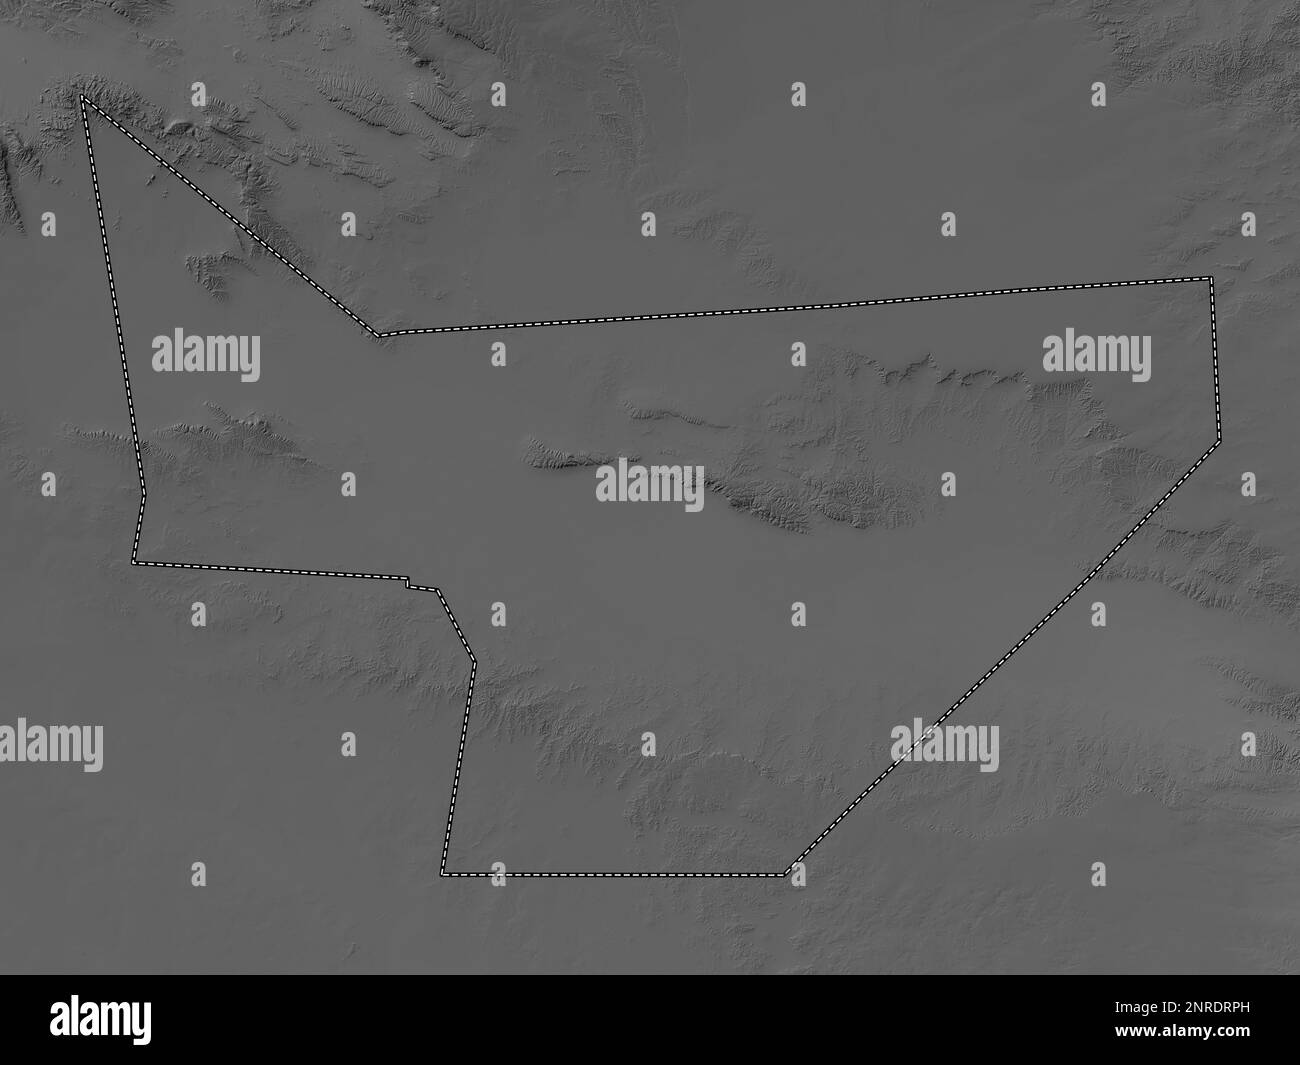 Sool, region of Somalia. Grayscale elevation map with lakes and rivers Stock Photo